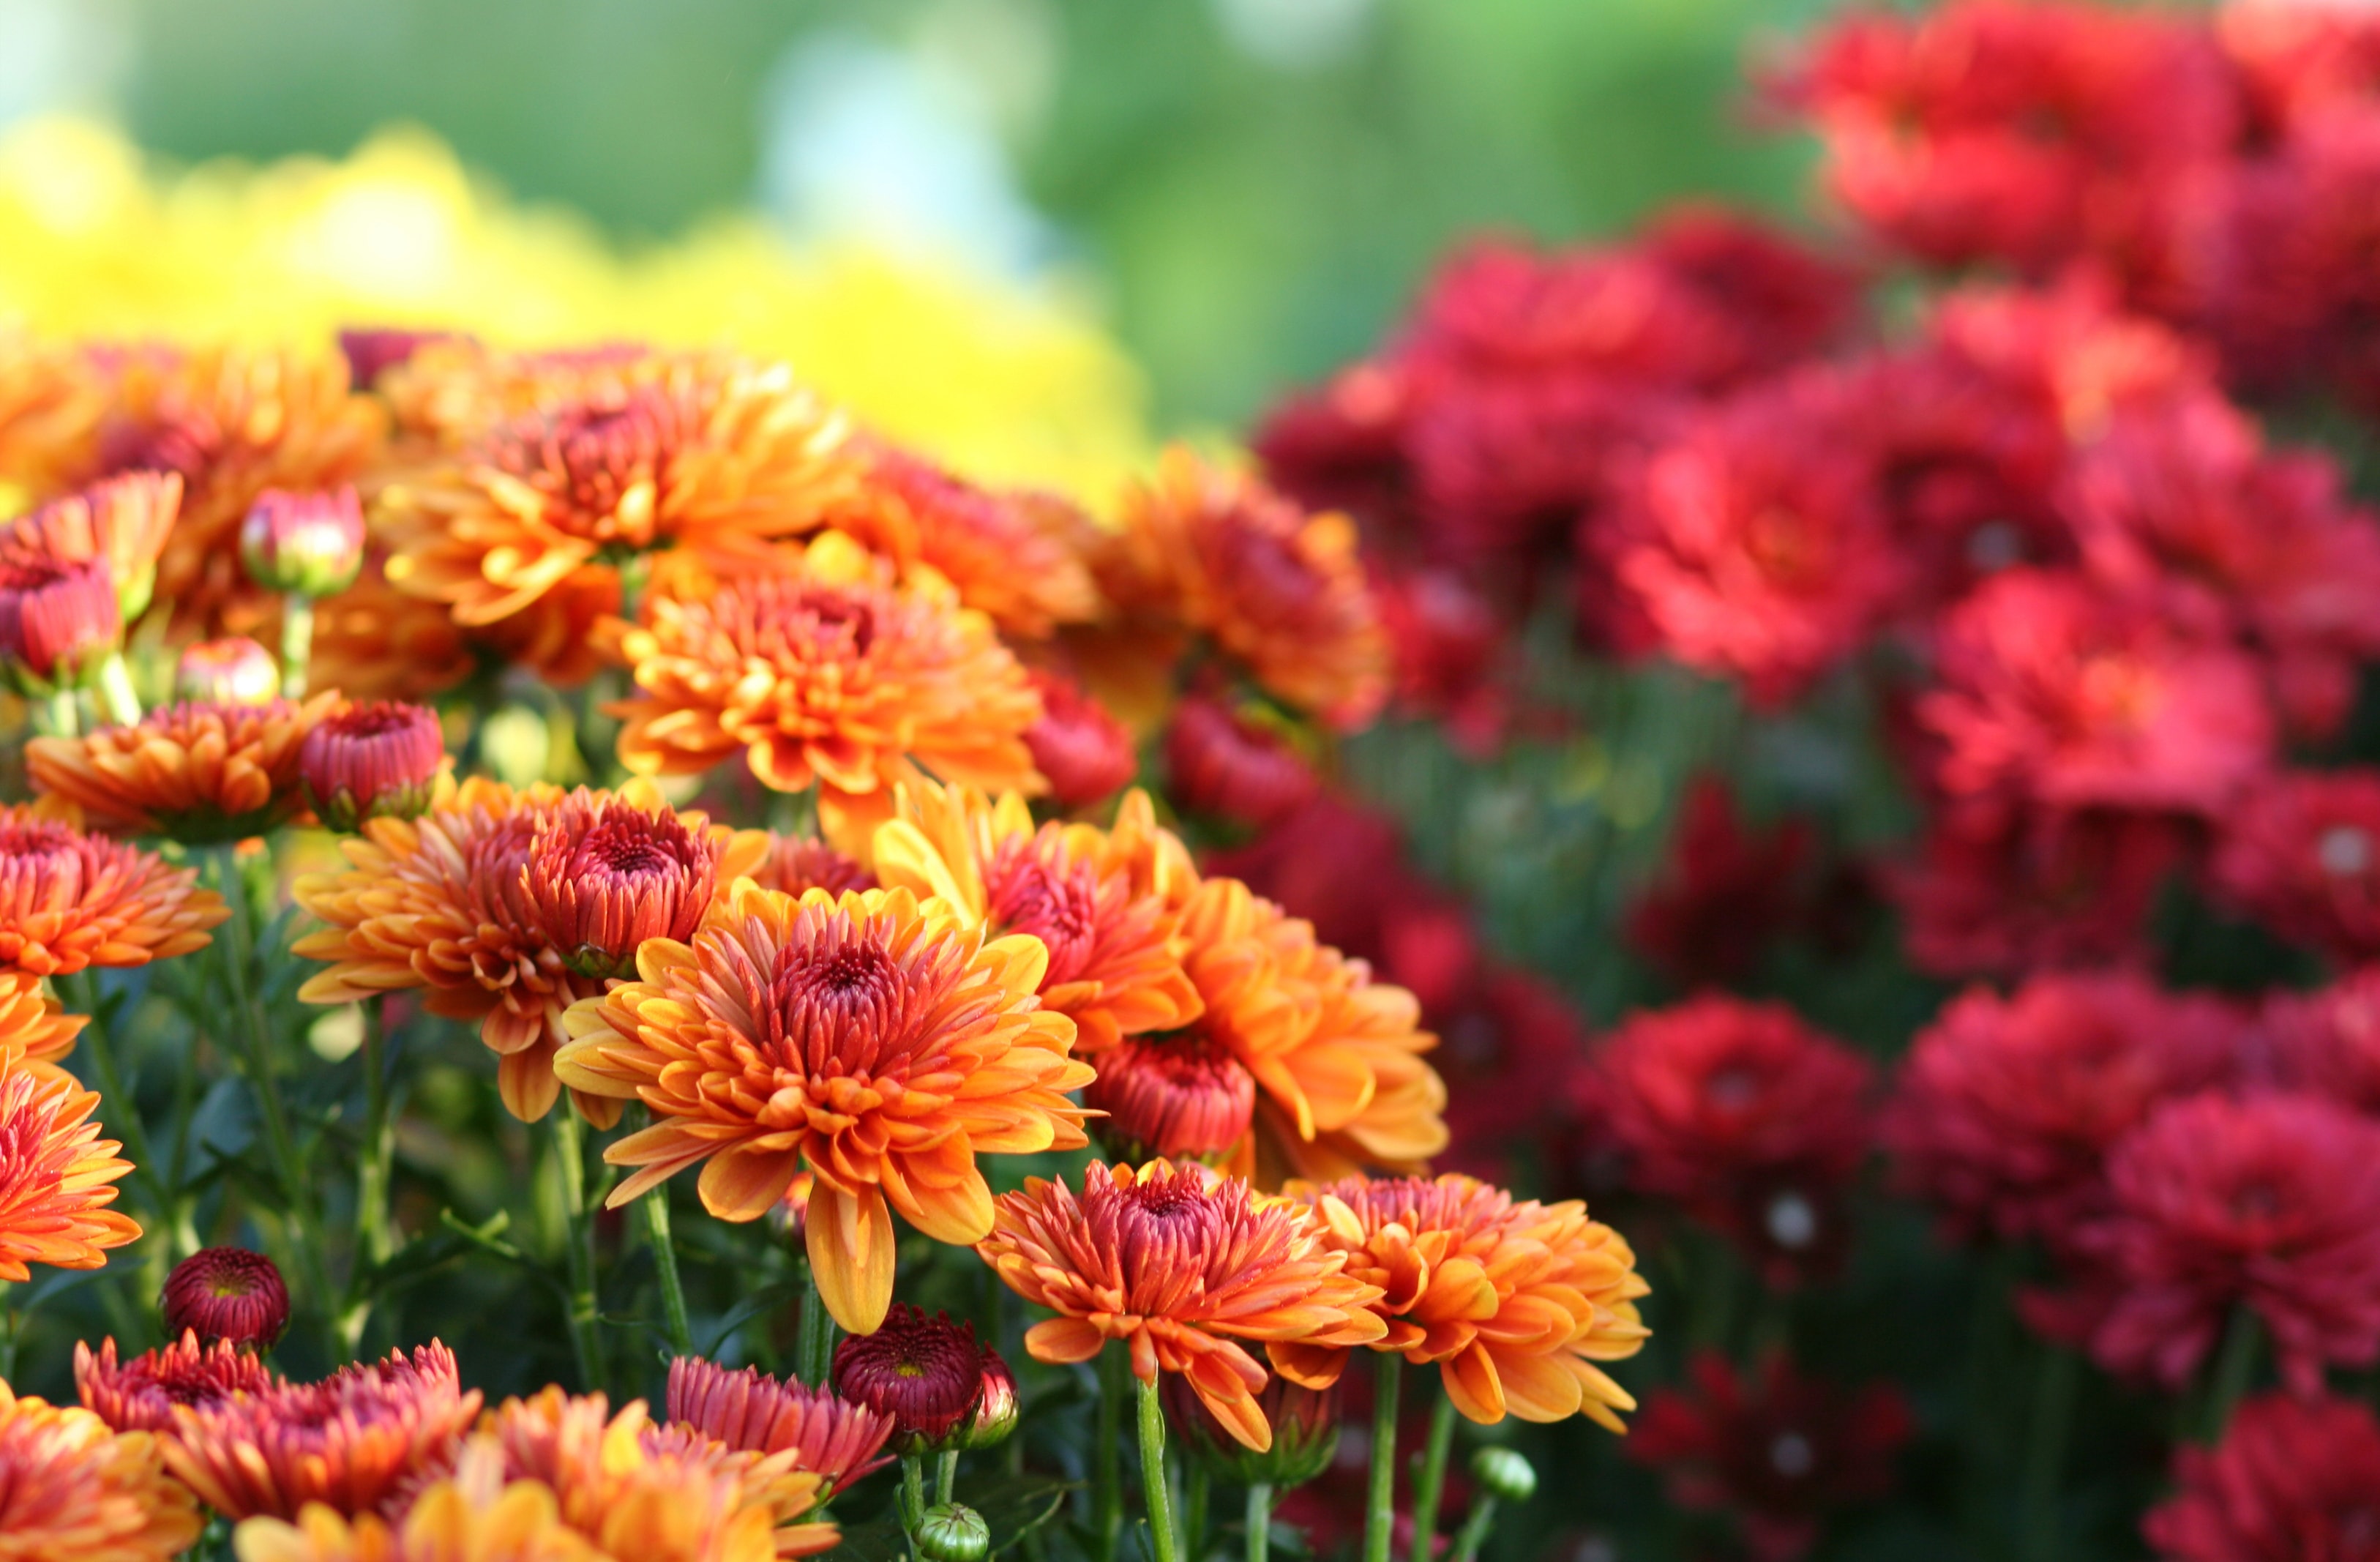 Orange and red fall mums